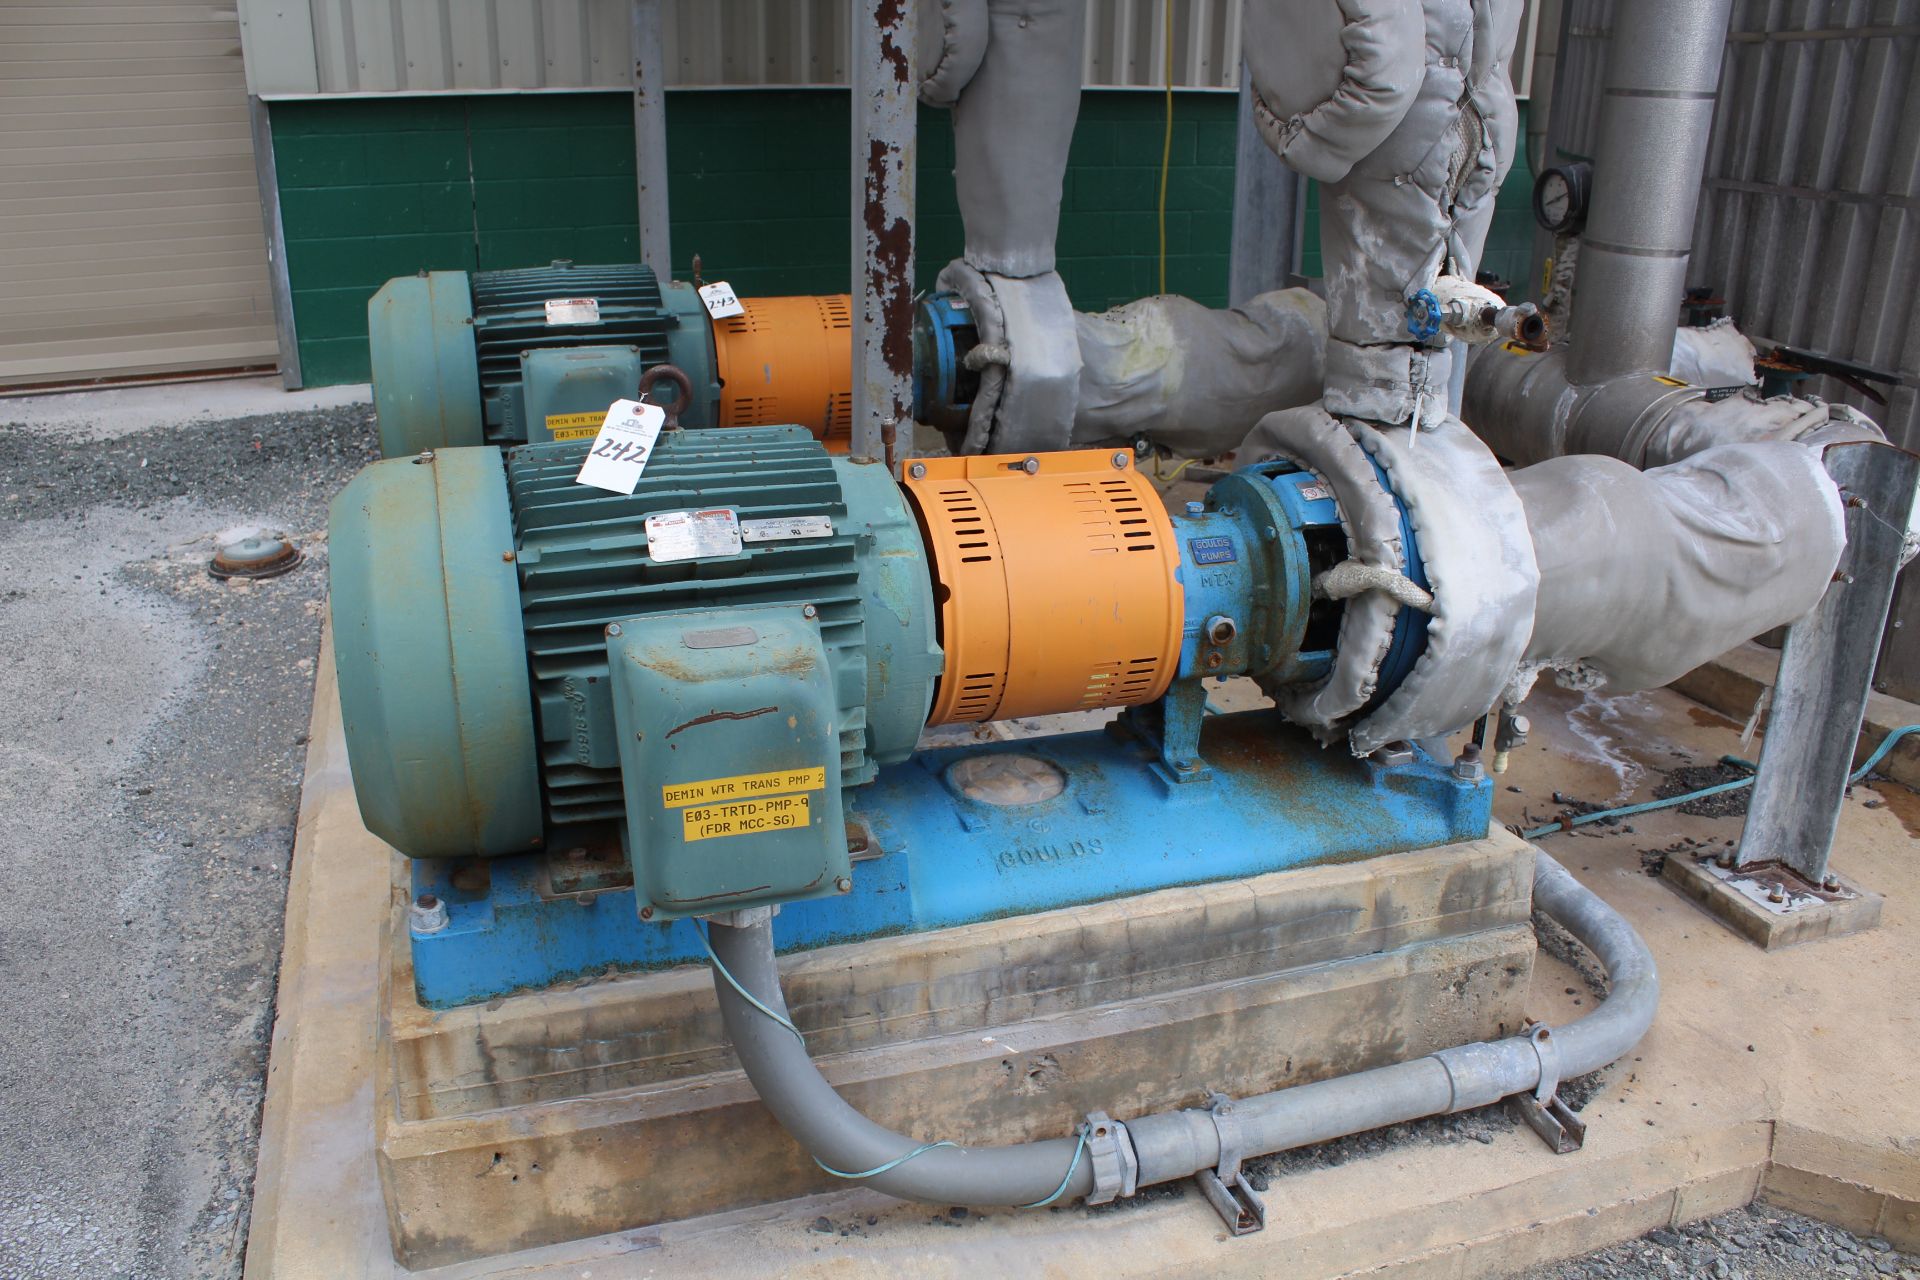 Goulds Pump, M# 3196 w/ Reliance 75 HP Motor | Rig Fee: $250